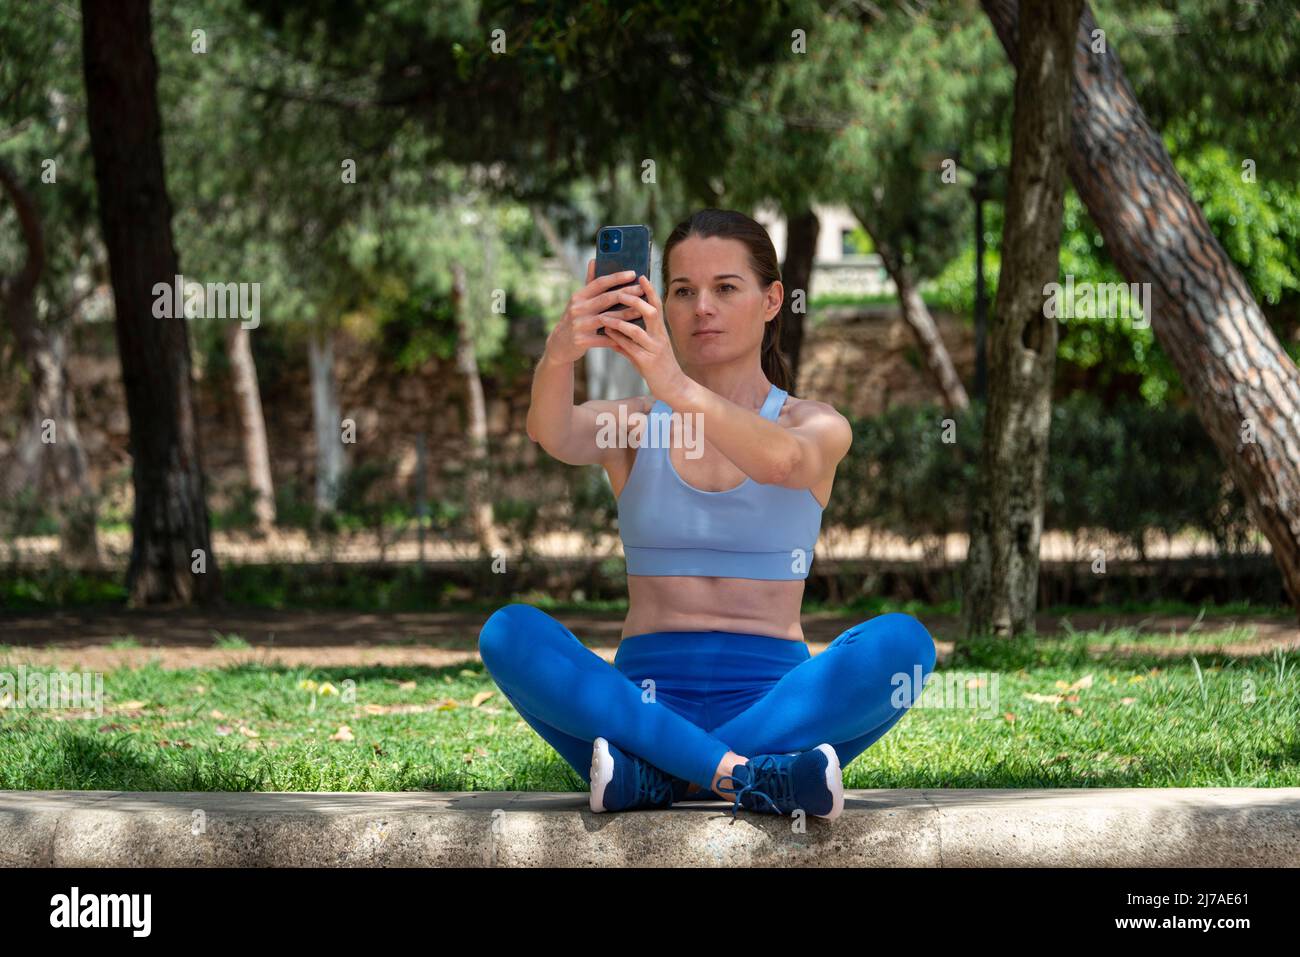 Pretty sporty woman sitting crossed legged in the park taking a selfie on her phone. Stock Photo